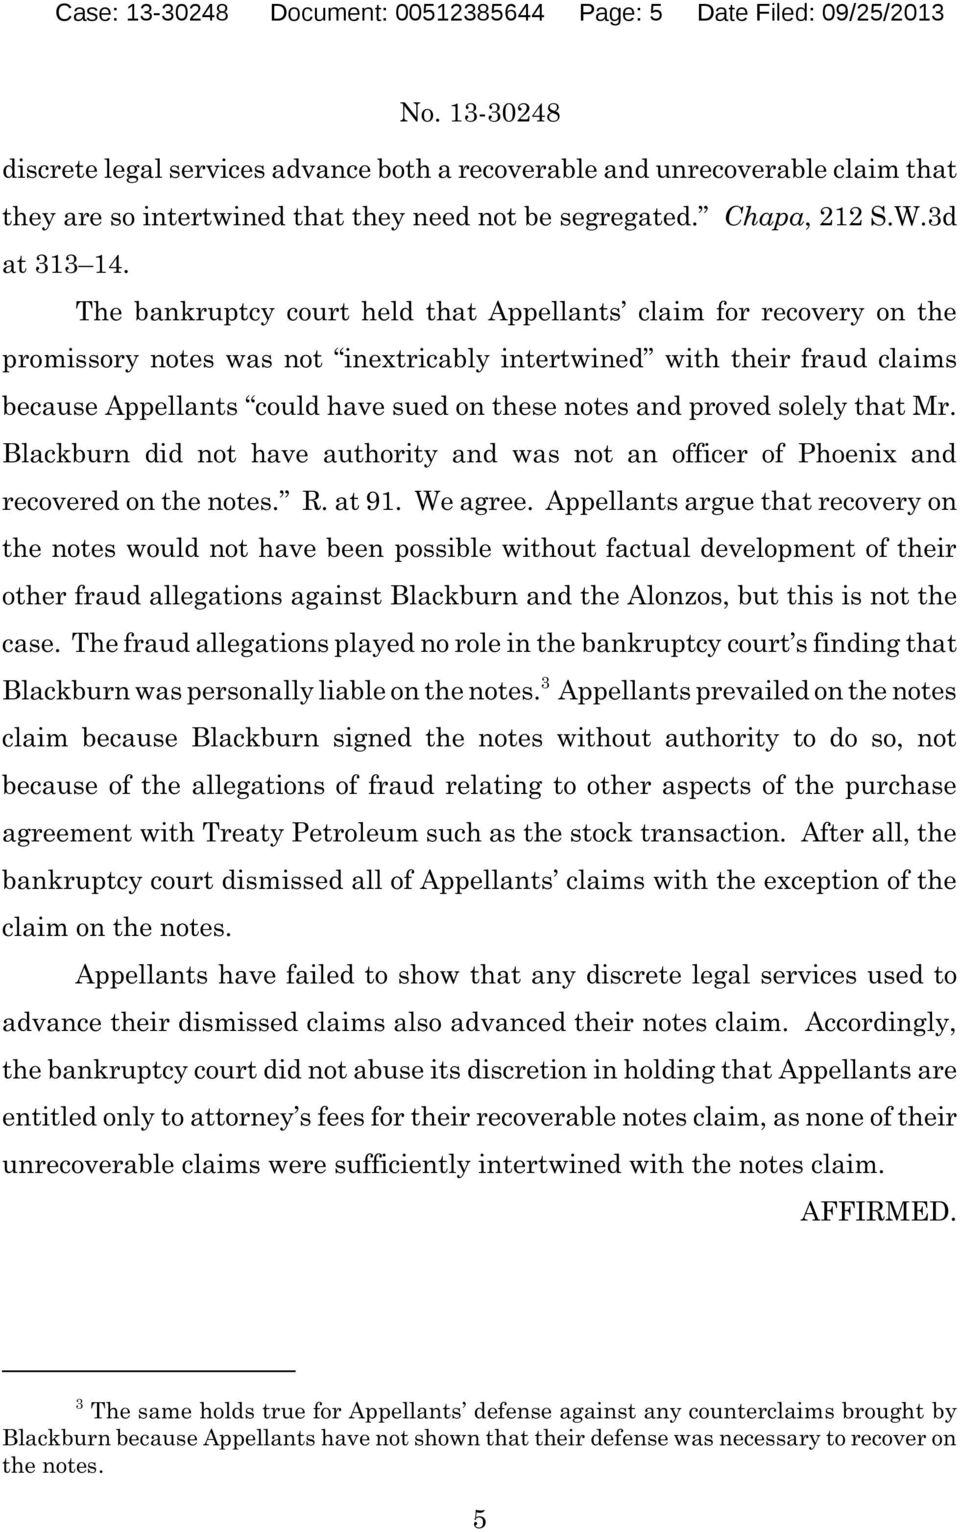 The bankruptcy court held that Appellants claim for recovery on the promissory notes was not inextricably intertwined with their fraud claims because Appellants could have sued on these notes and